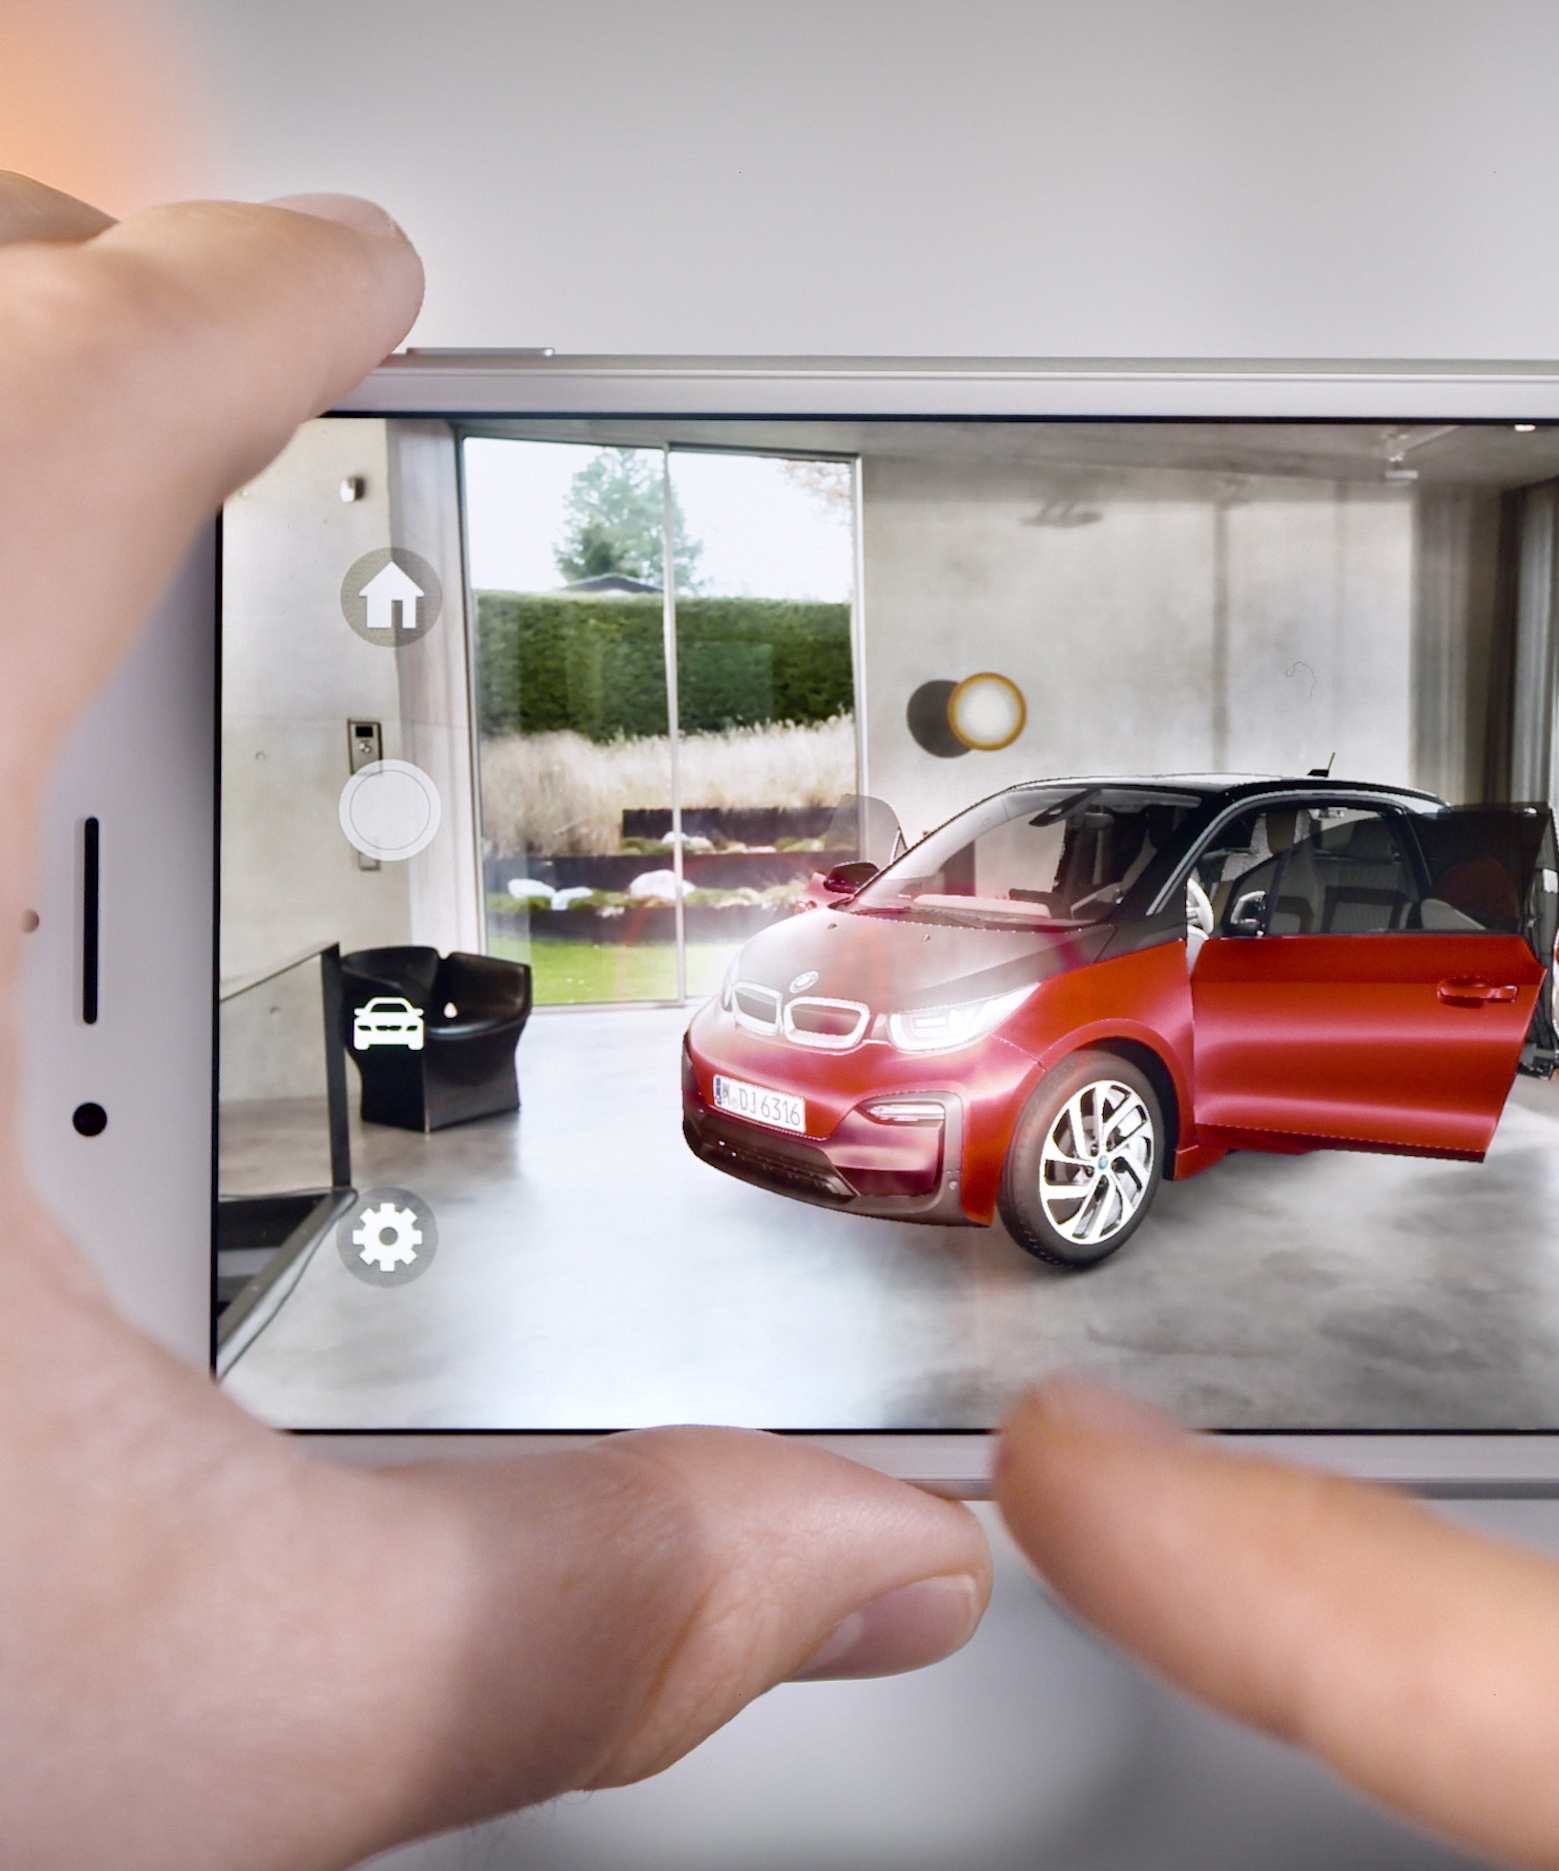 BMW i visualiser augmented reality app is now available on (some) iPhones